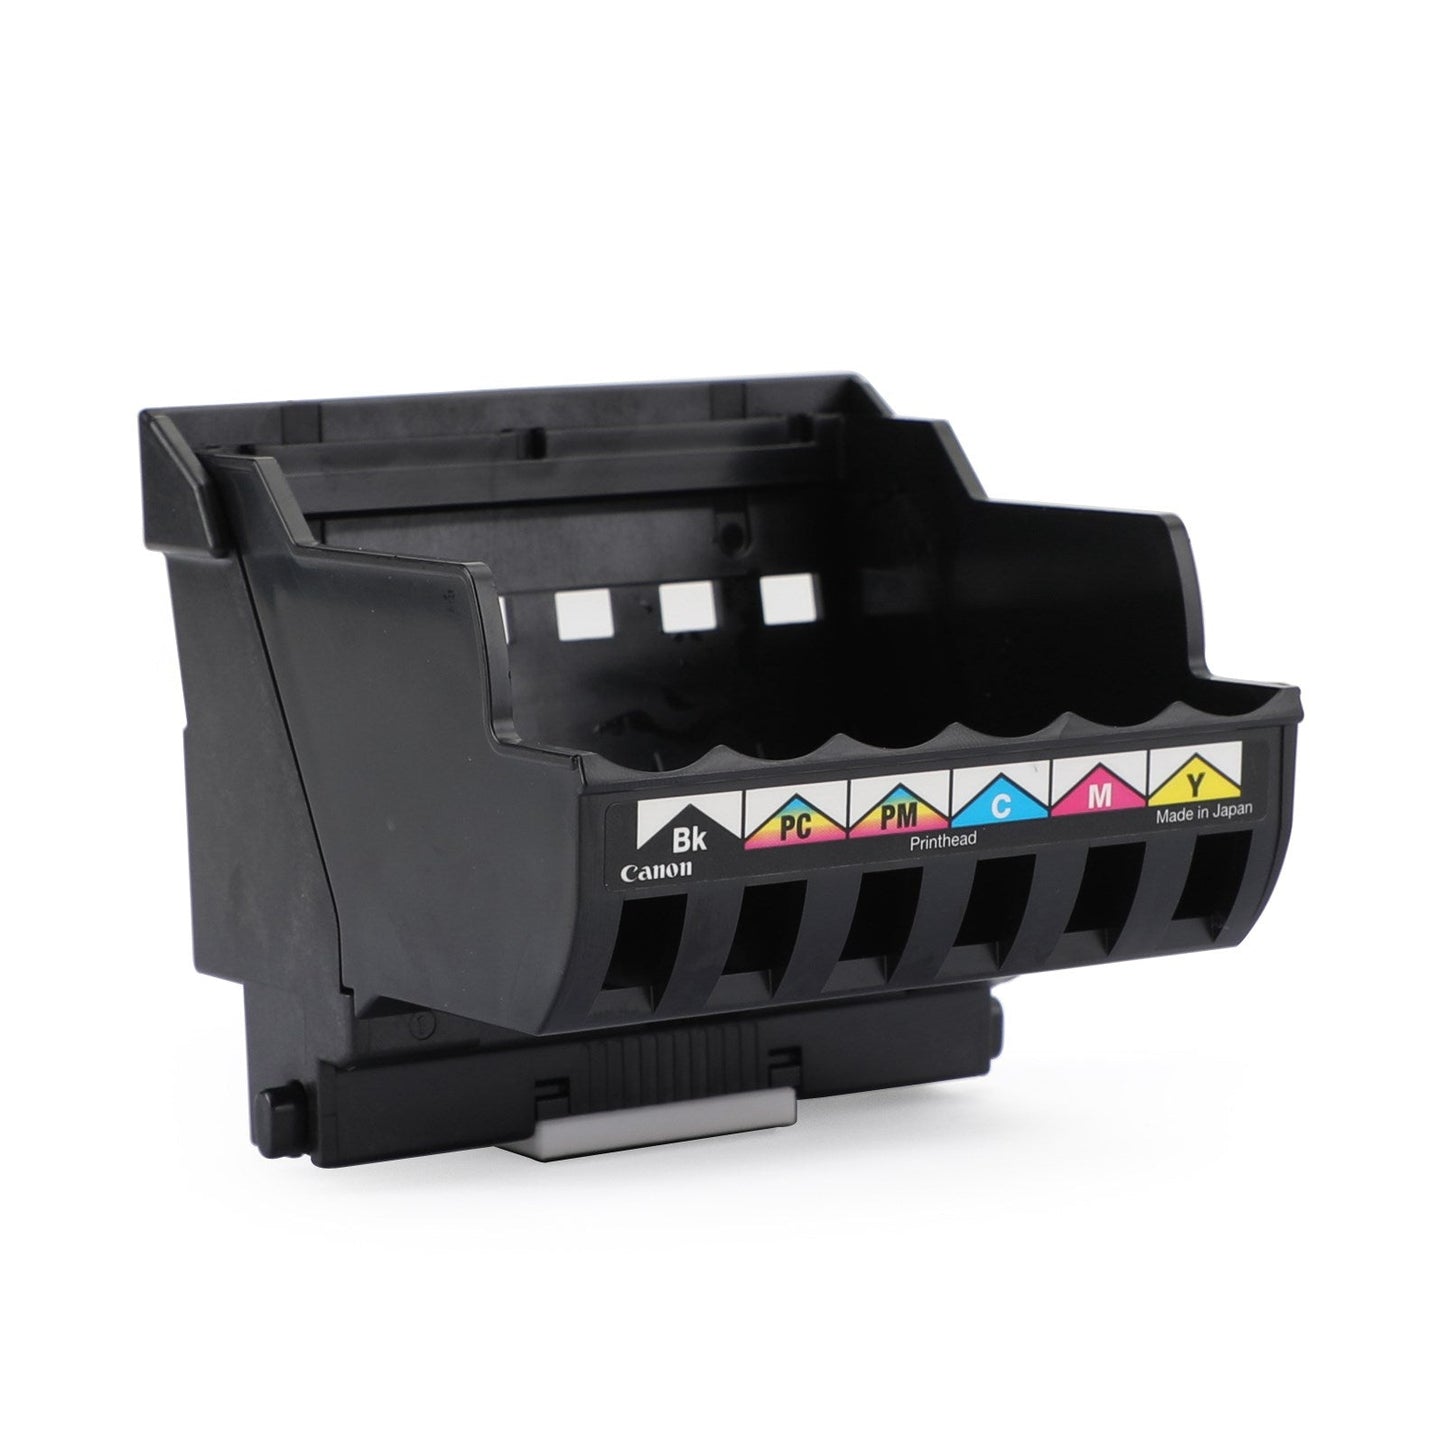 Replacement Printer Print Head QY6-0039 Fit for 9100i S9000 S900 i9100 F9000